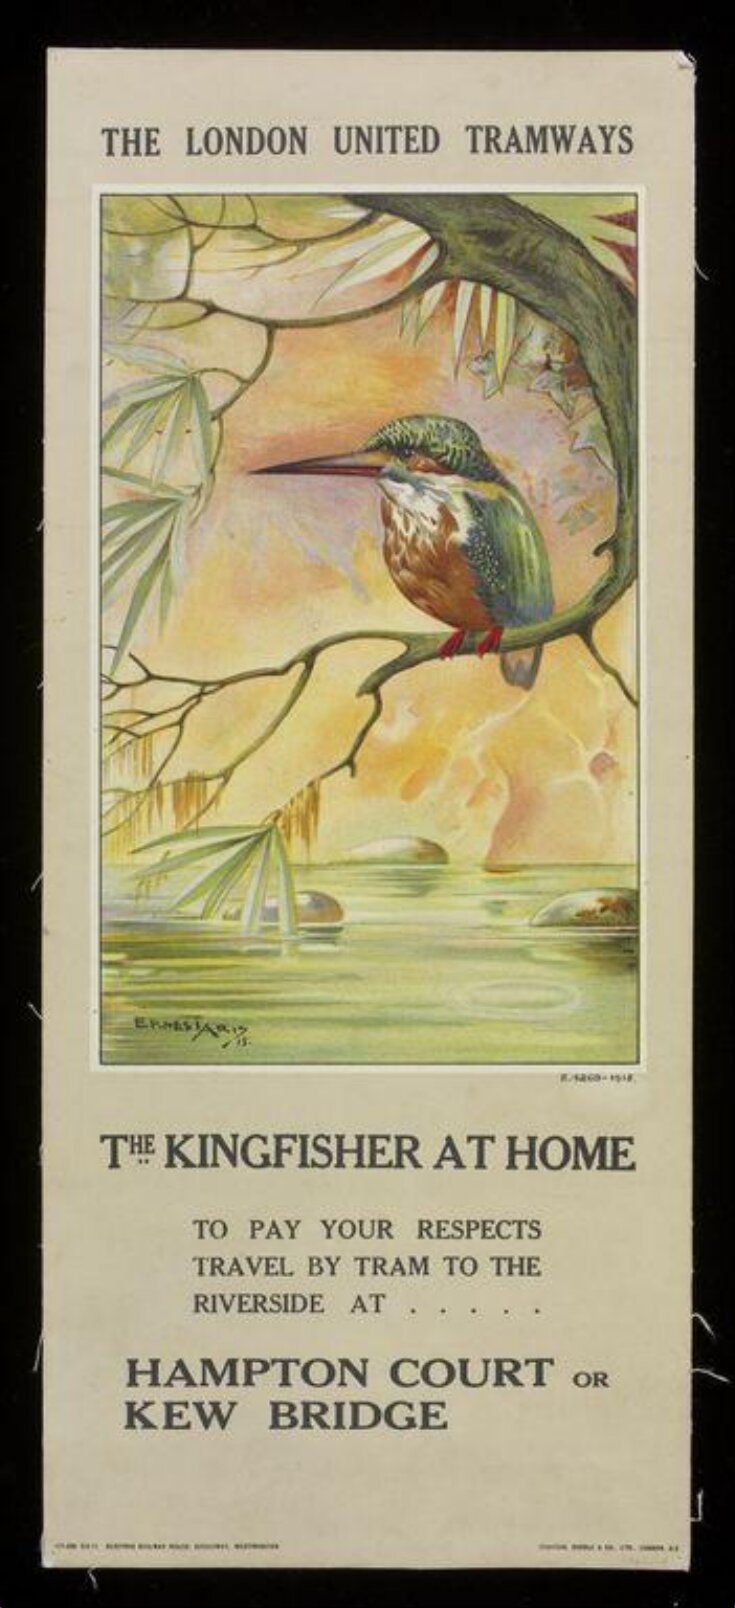 The Kingfisher At Home image